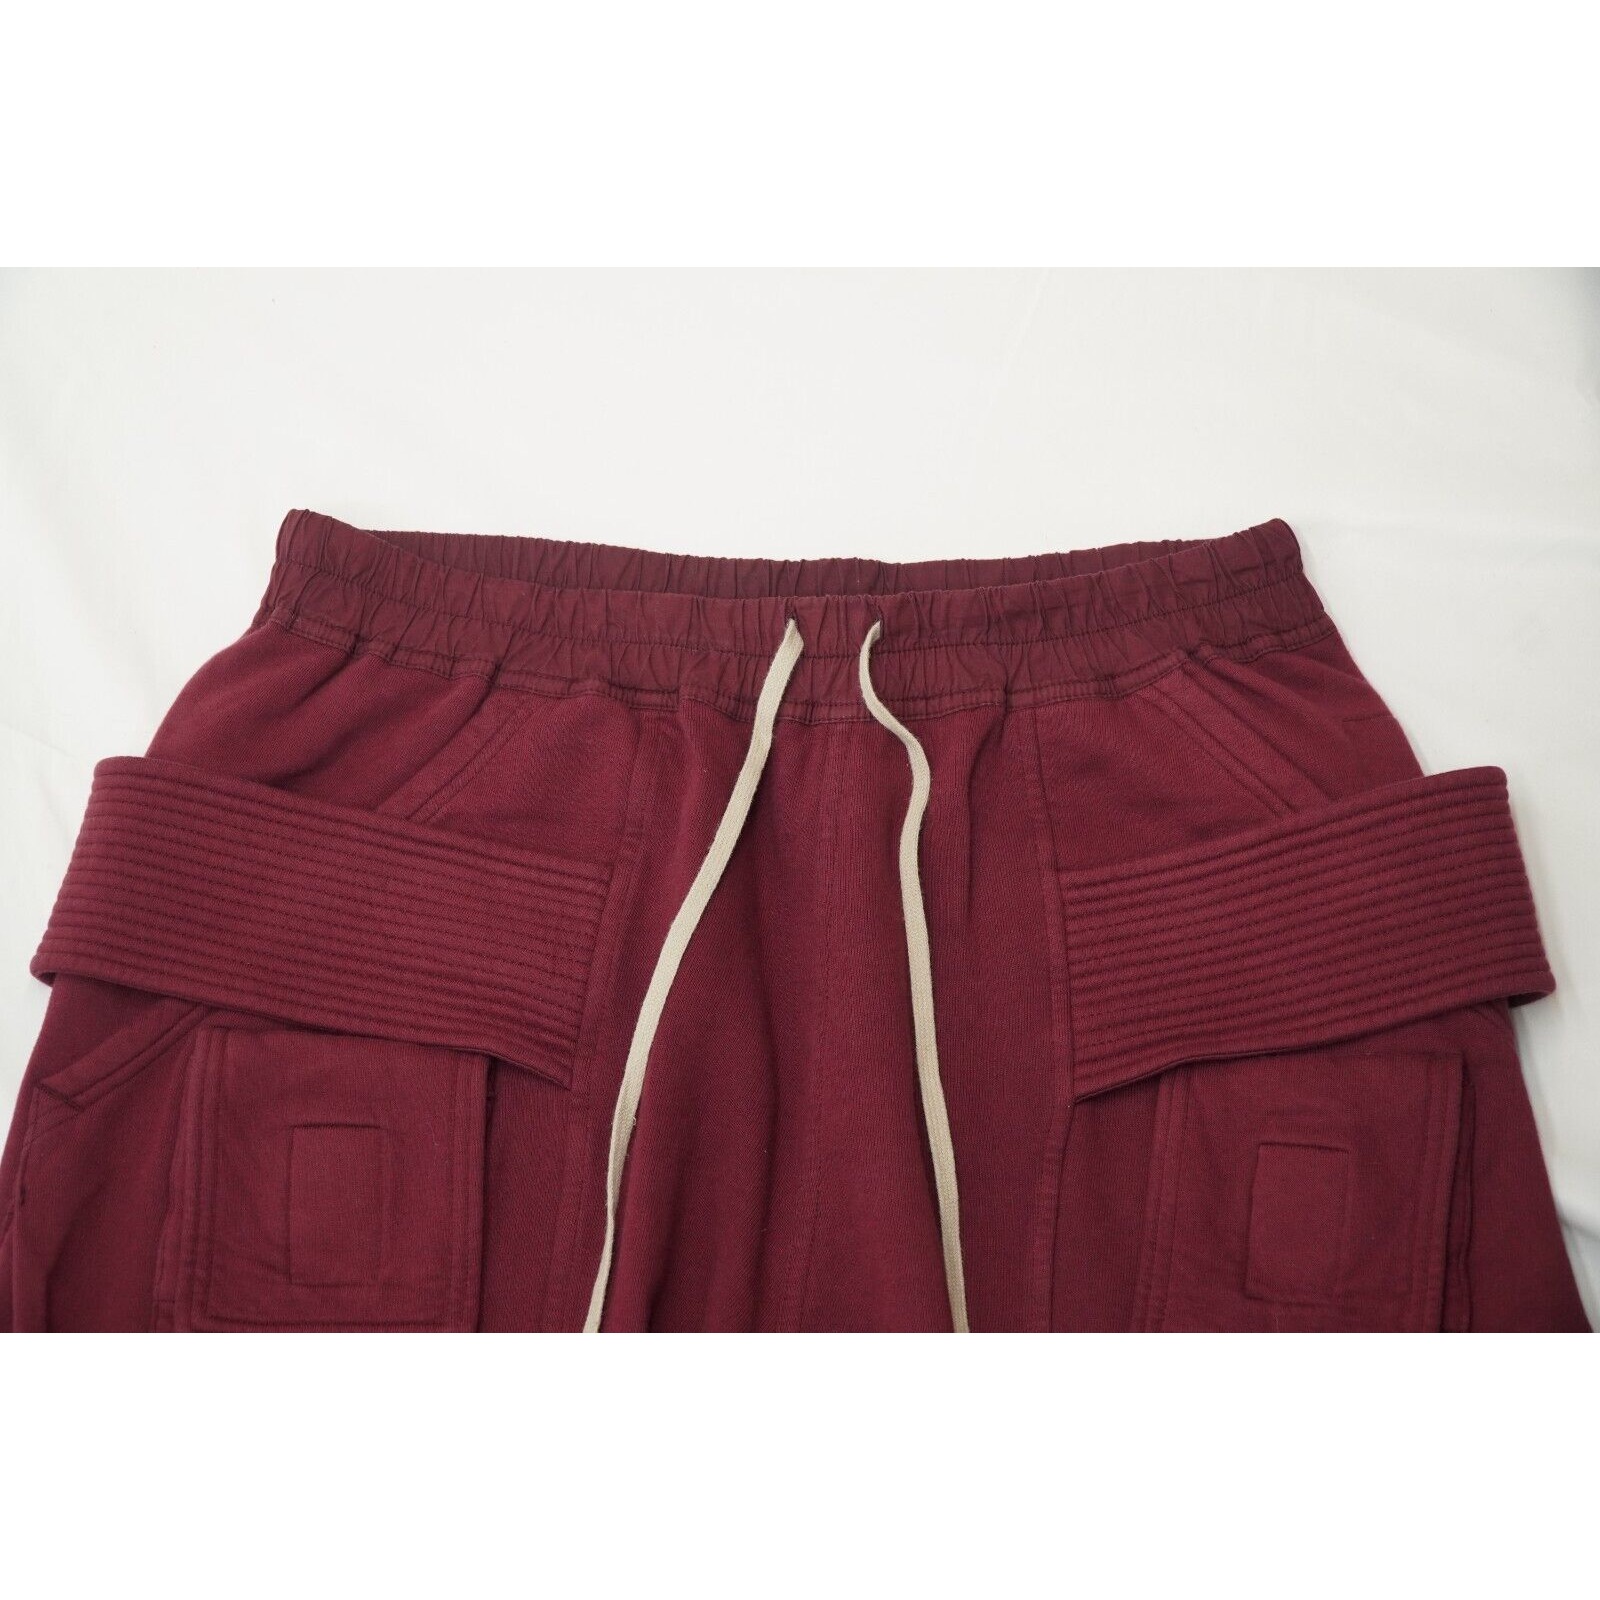 Rick Creatch Cargo Cropped Sweatpant Bruise Red FW20 - 4